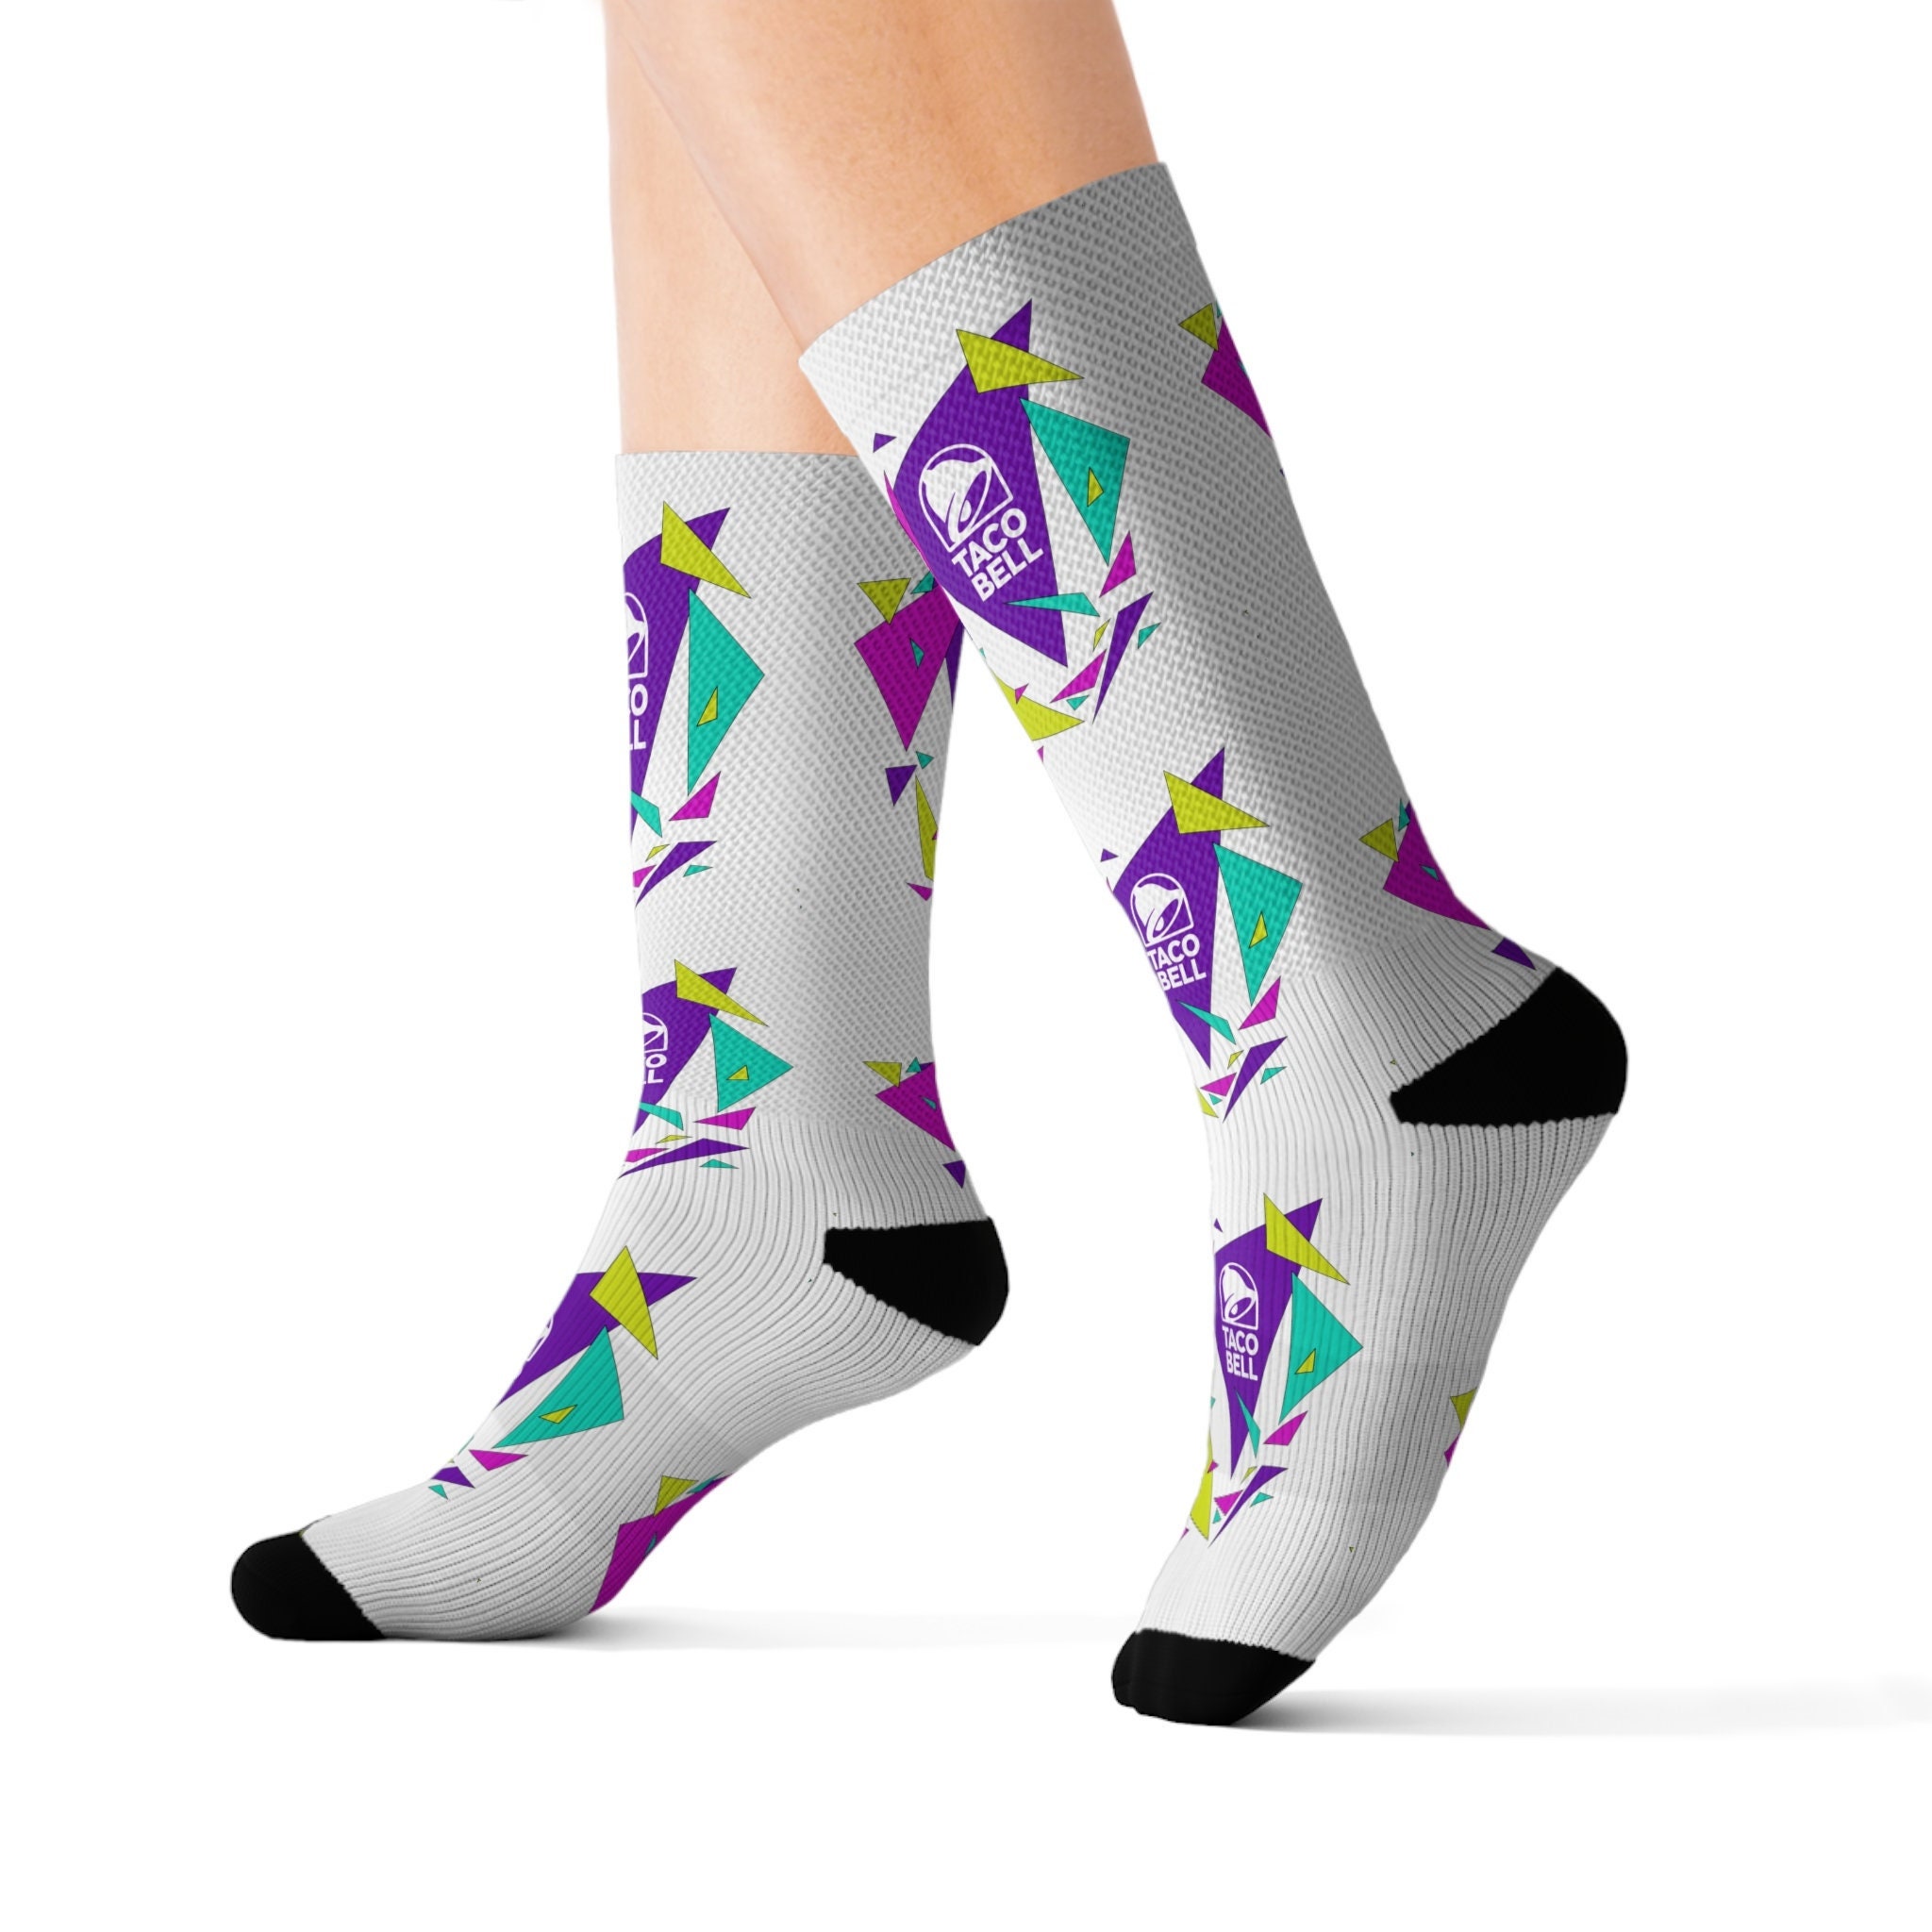 Two Left Feet Unisex-Adults Novelty Crew Sock, Taco Tuesday, Small